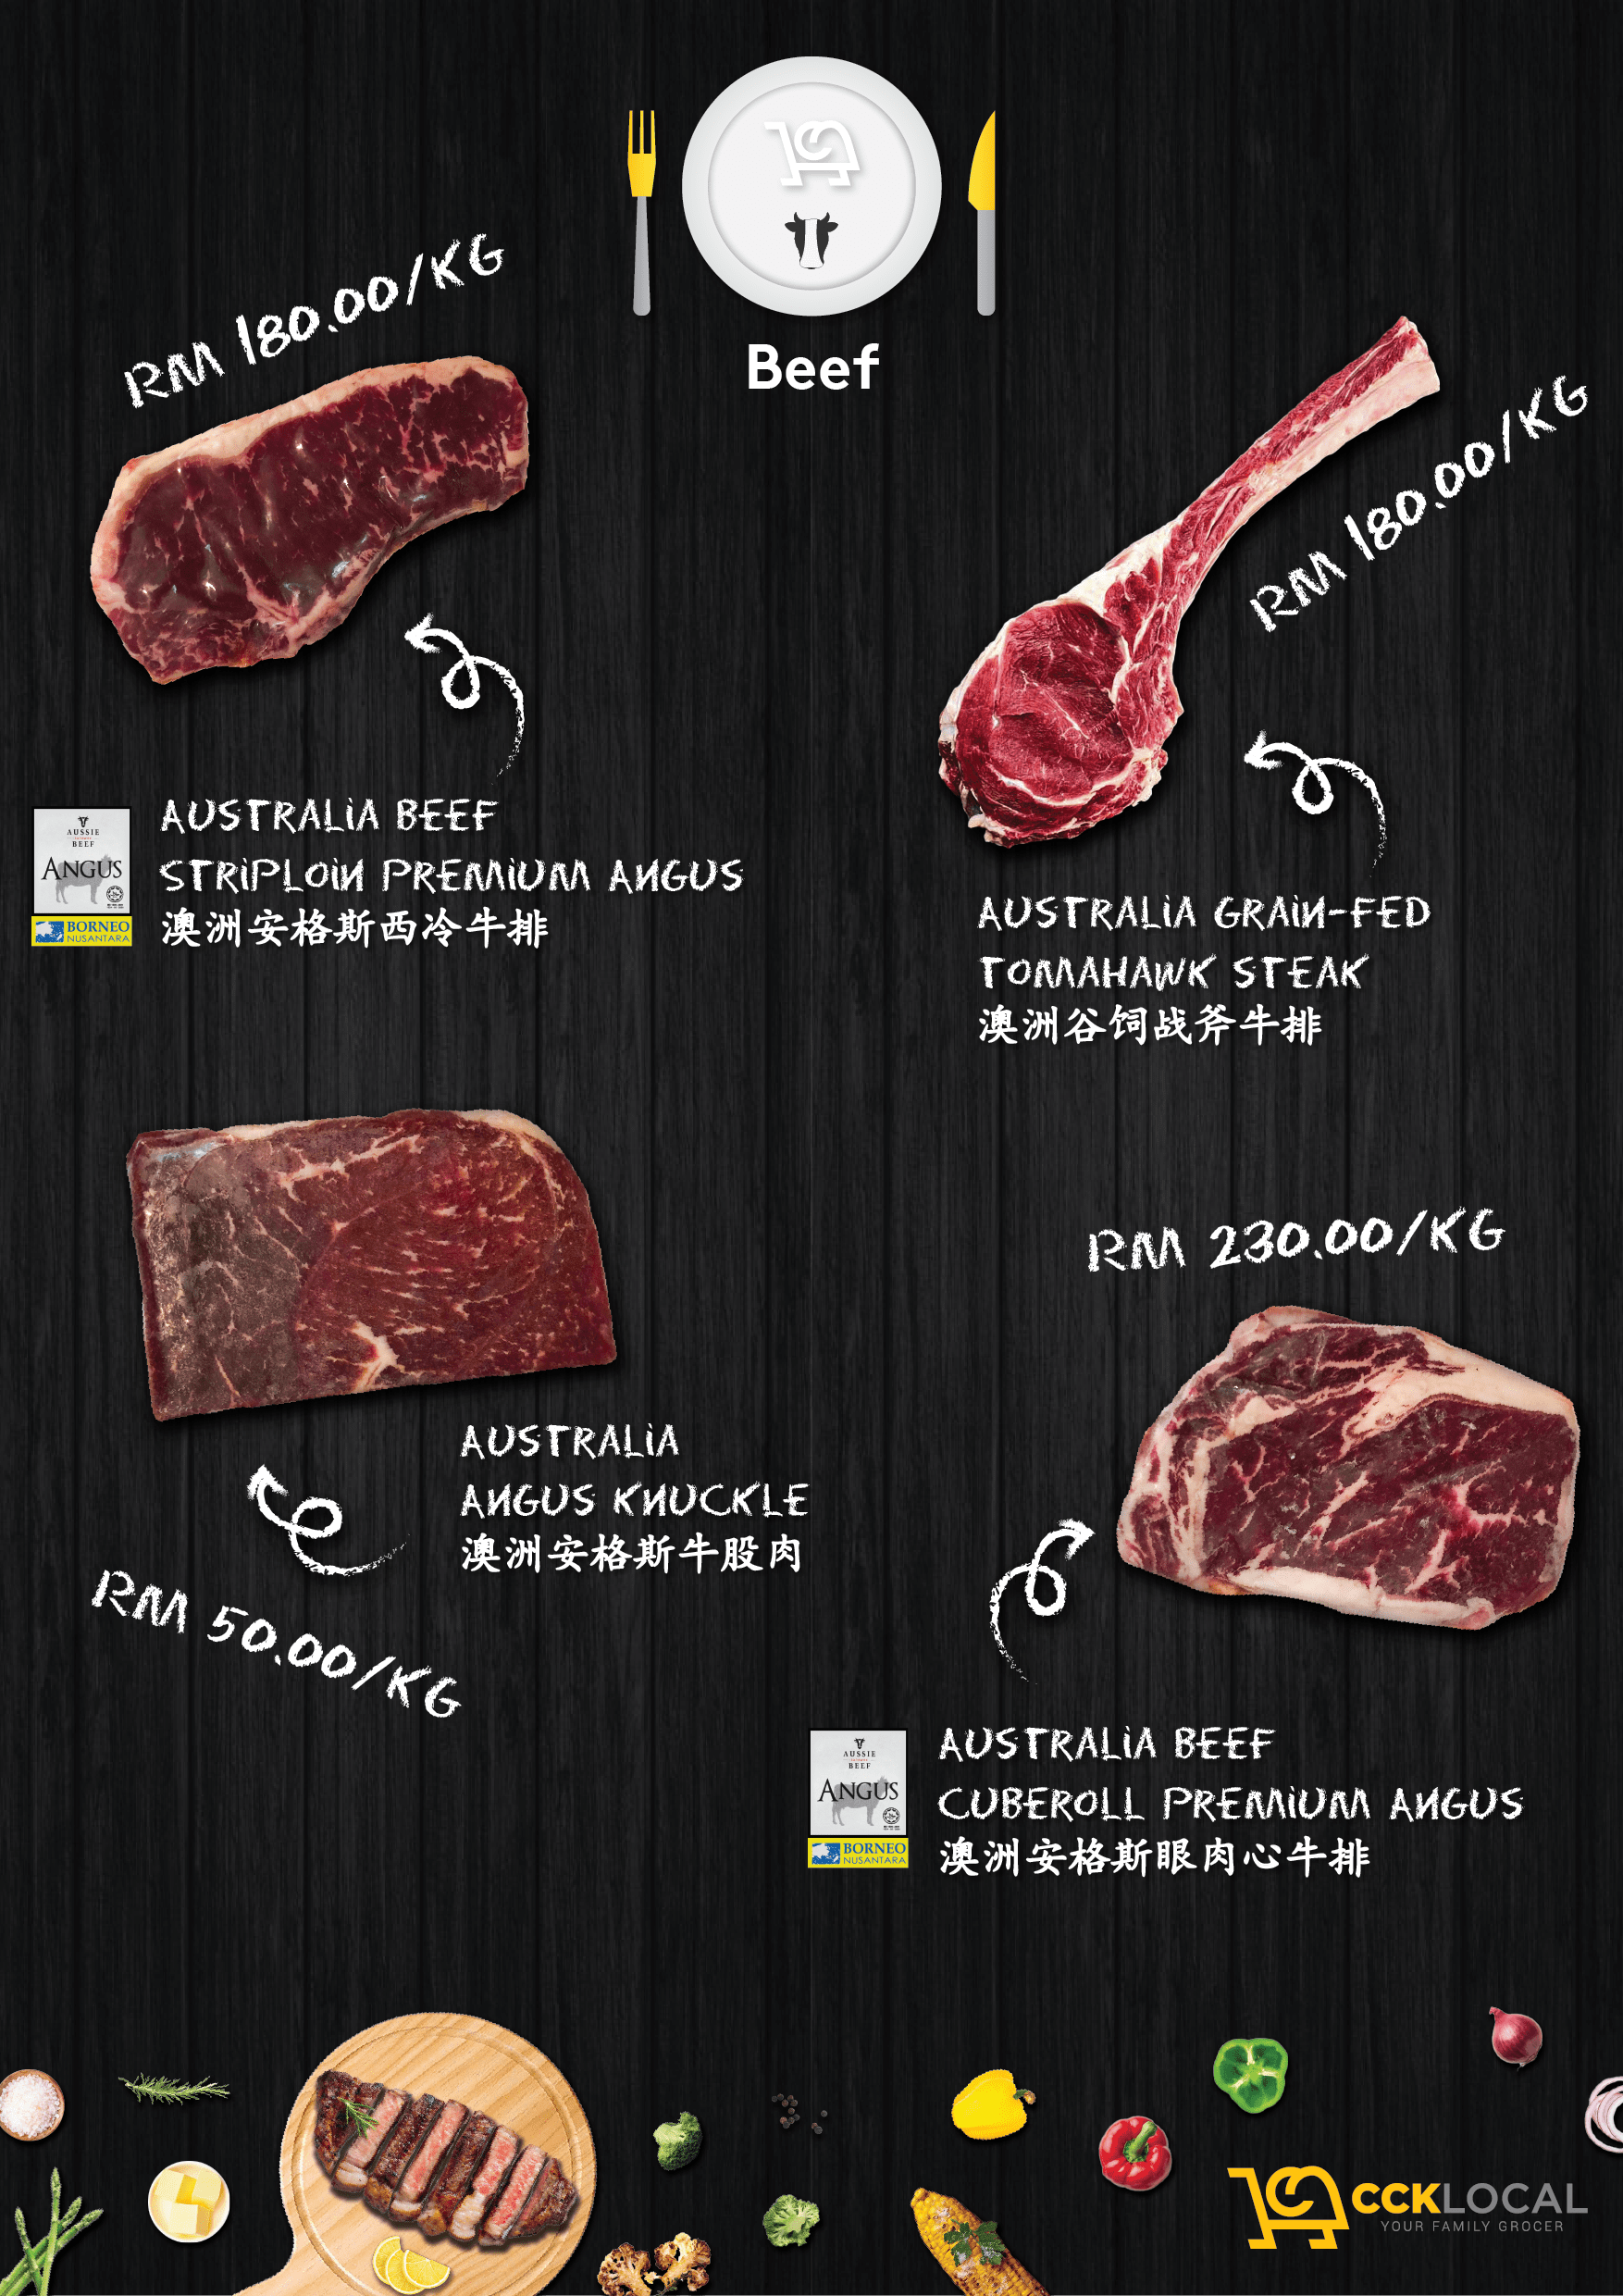 CCKLOCAL Kuching - Australia Angus Beef available now! - CCK Local